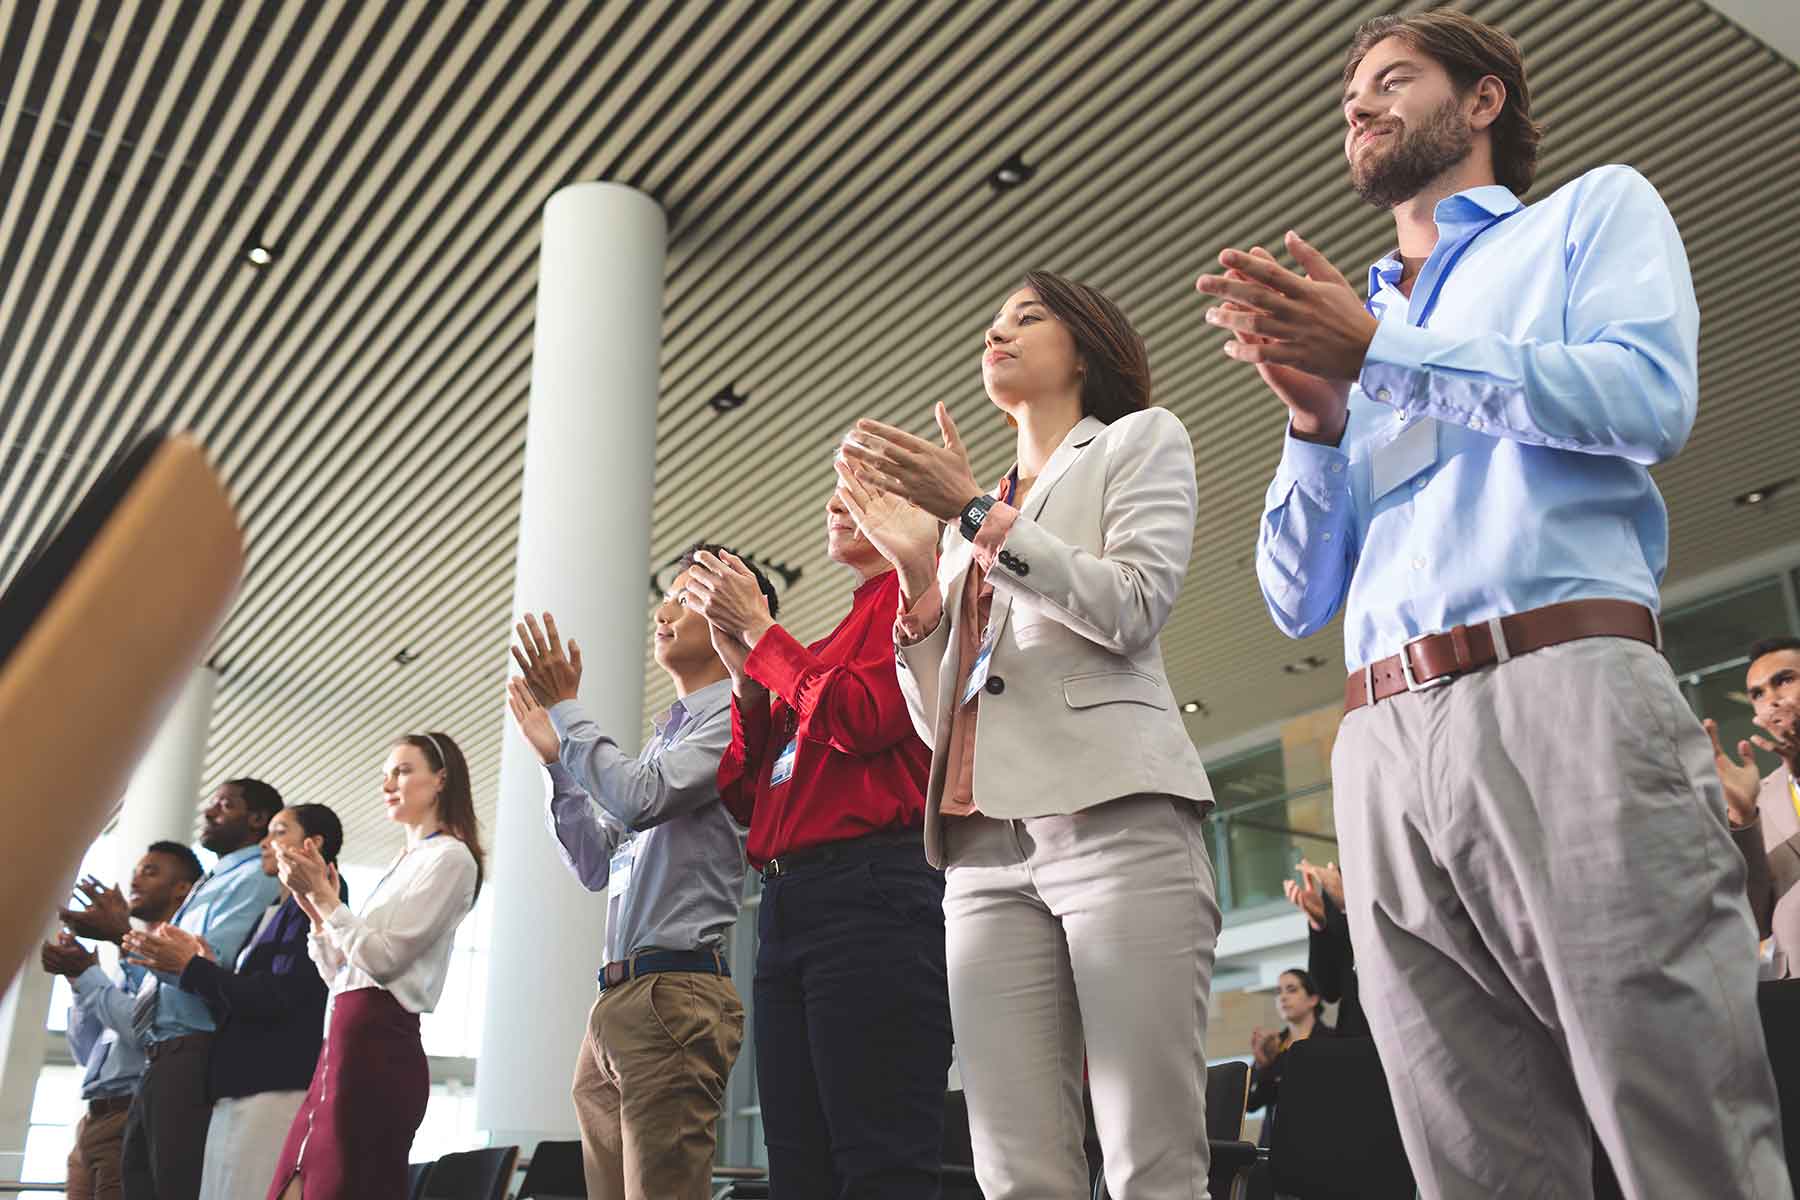 business-people-clapping-while-standing-at-a-busin-T3UJP8H.jpg